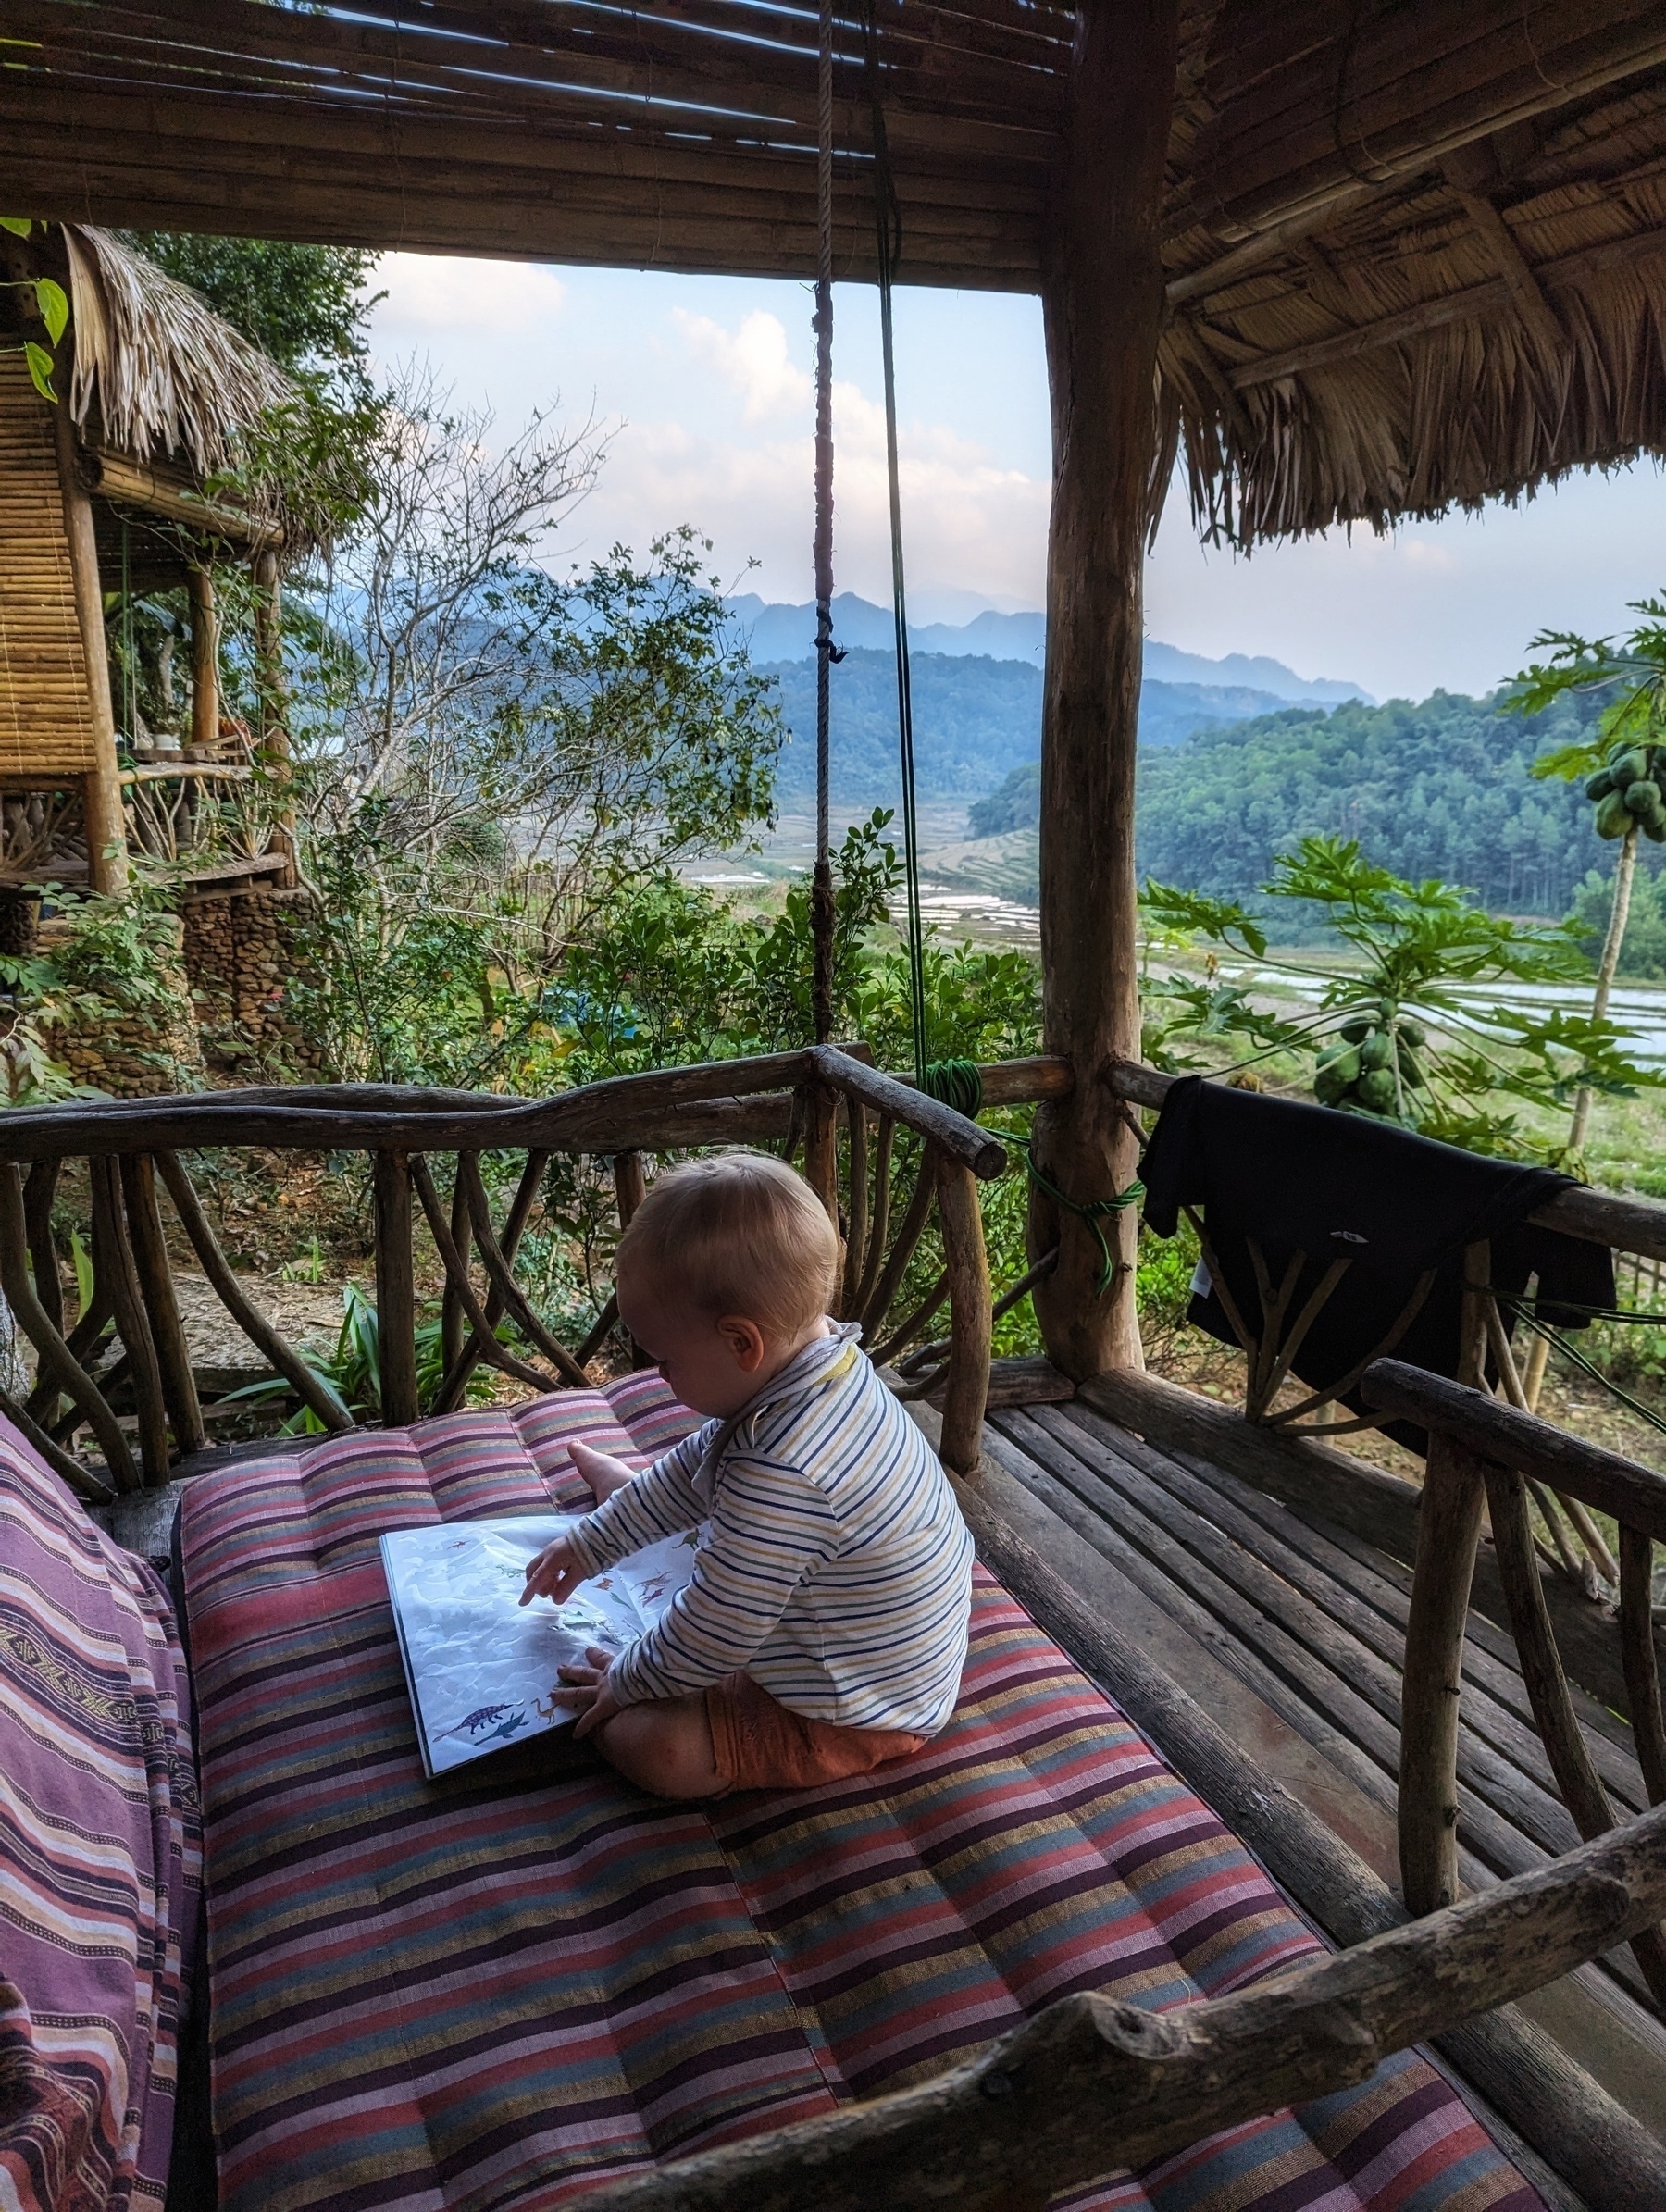 Picture of a little kid sitting on a wooden balcony playing with a sticker magazine. Huts on the left, scenic mountains and green rice fields in the back. A lot going on but still a very quiet snapshot.